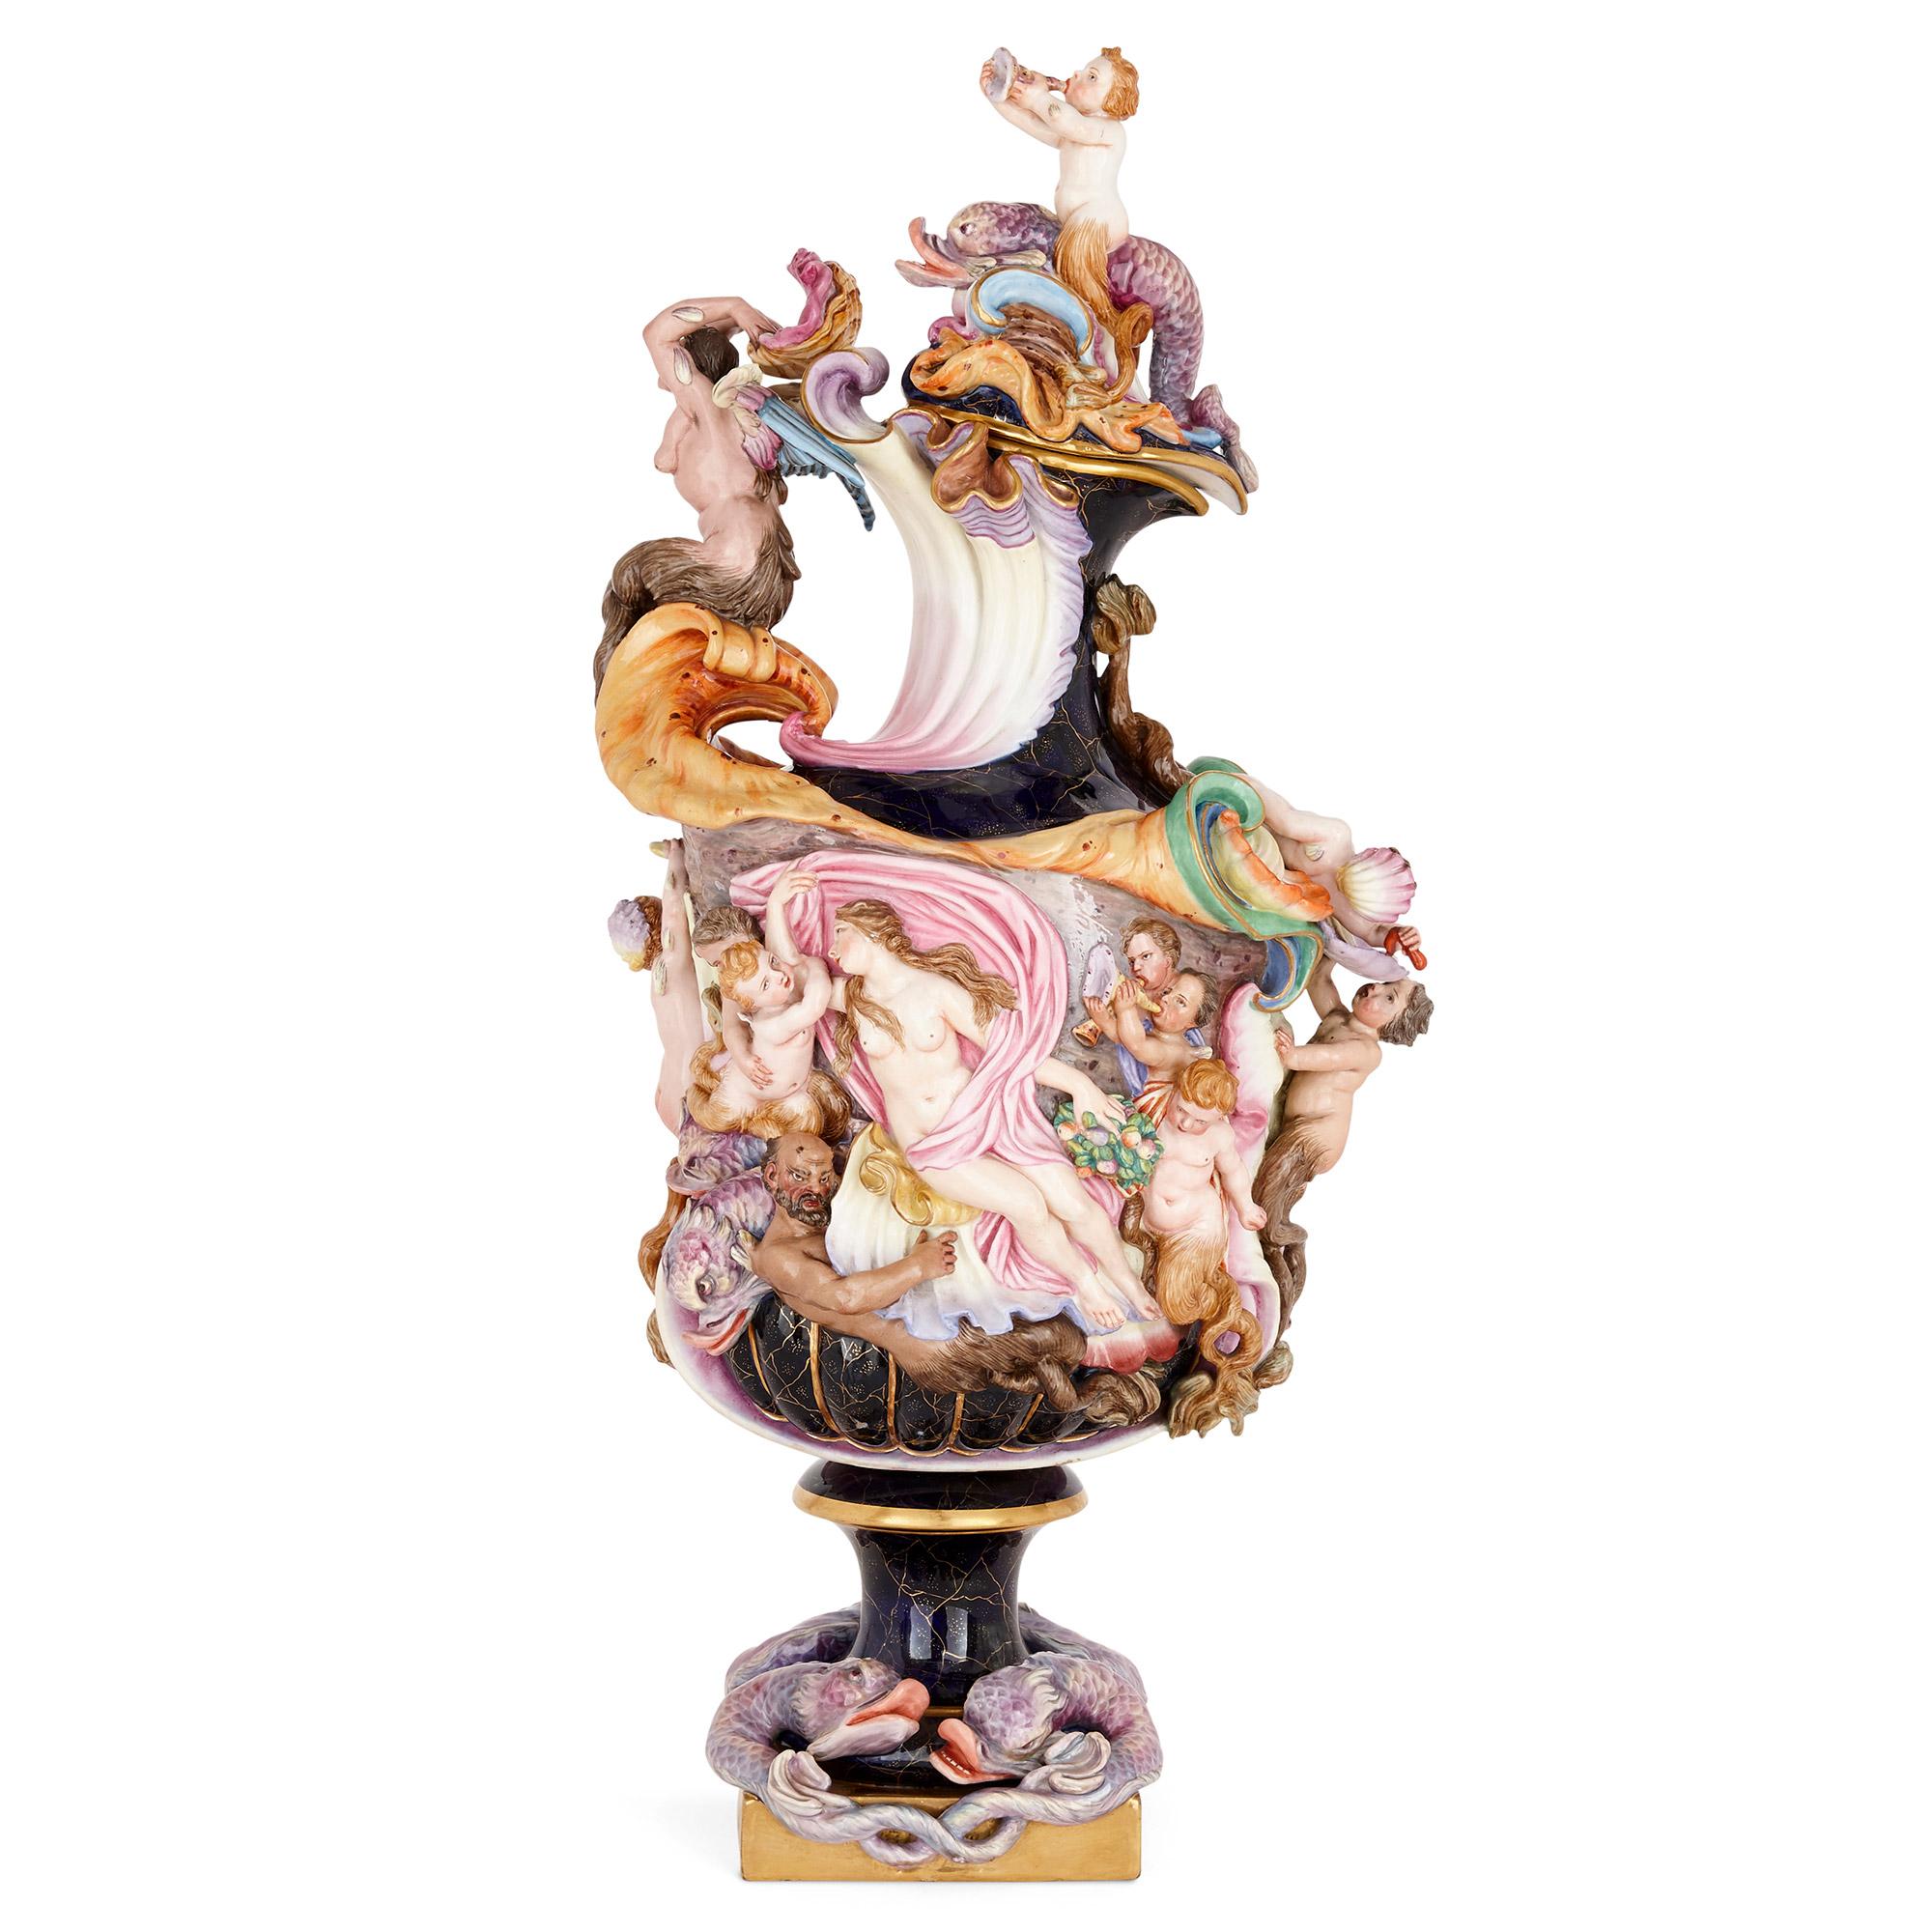 Large Capodimonte porcelain ewer and cover
Italian, circa 1880
Measures: Height 75cm, width 36cm, depth 27cm

Made in Italy towards the end of the 19th century, this large and rare ewer is finely decorated with dolphins, shells and mythological